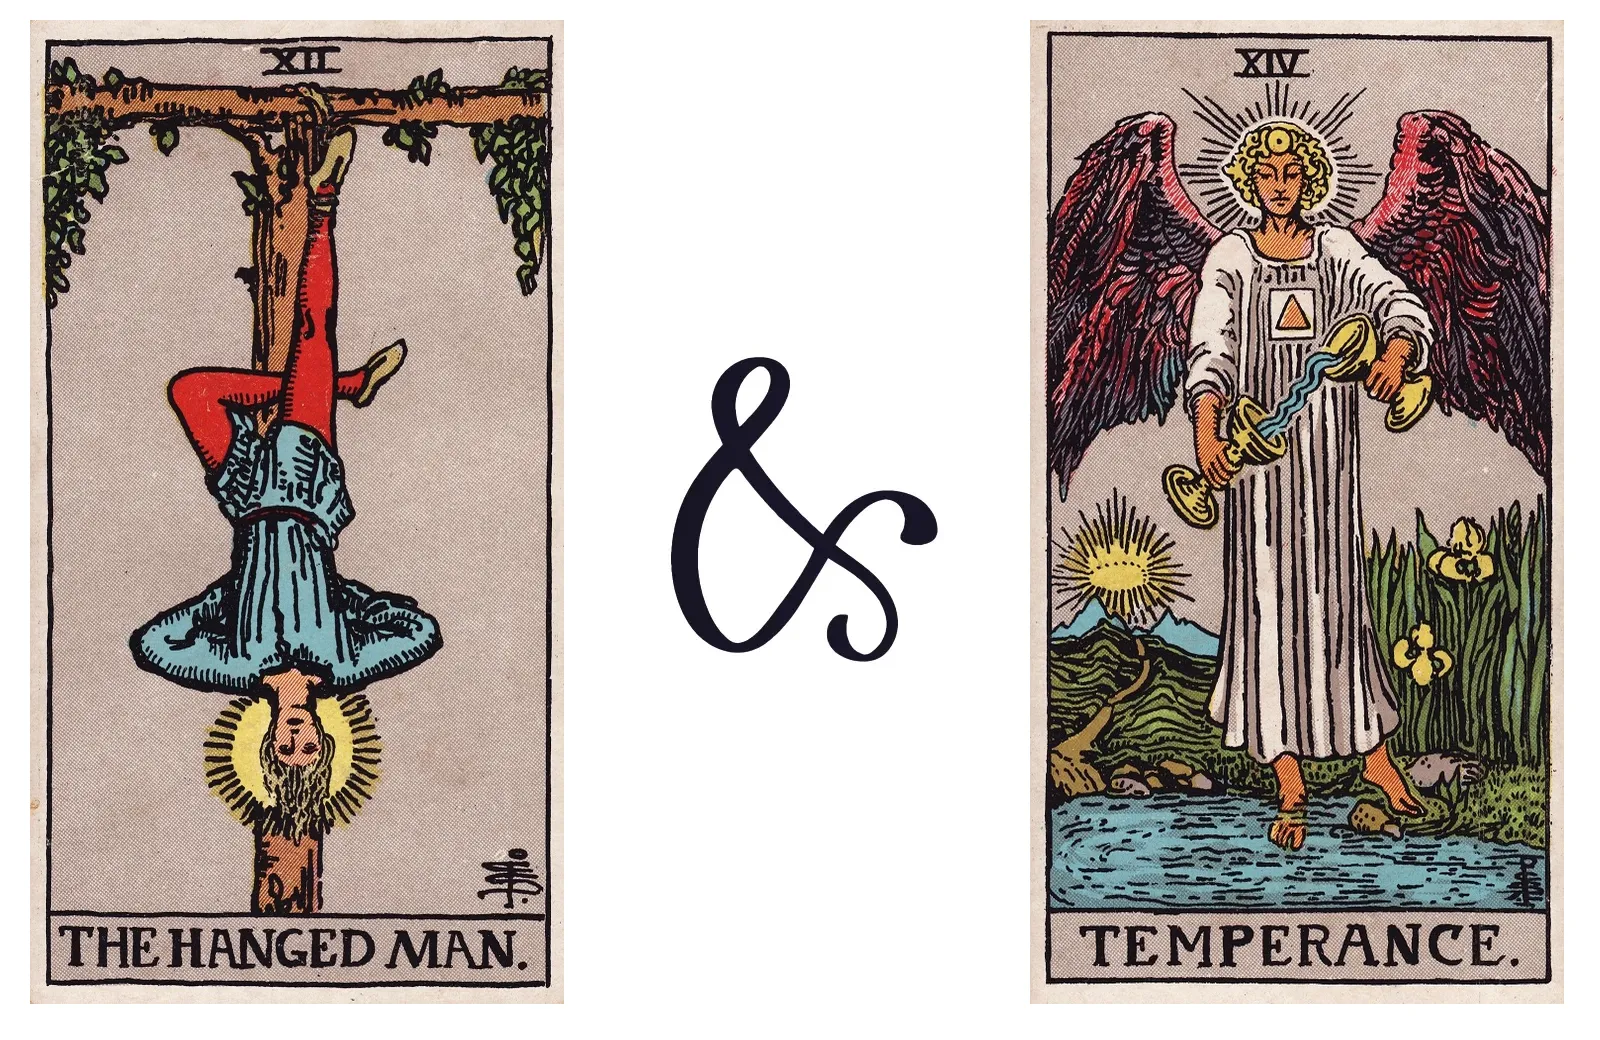 The Hanged Man and Temperance